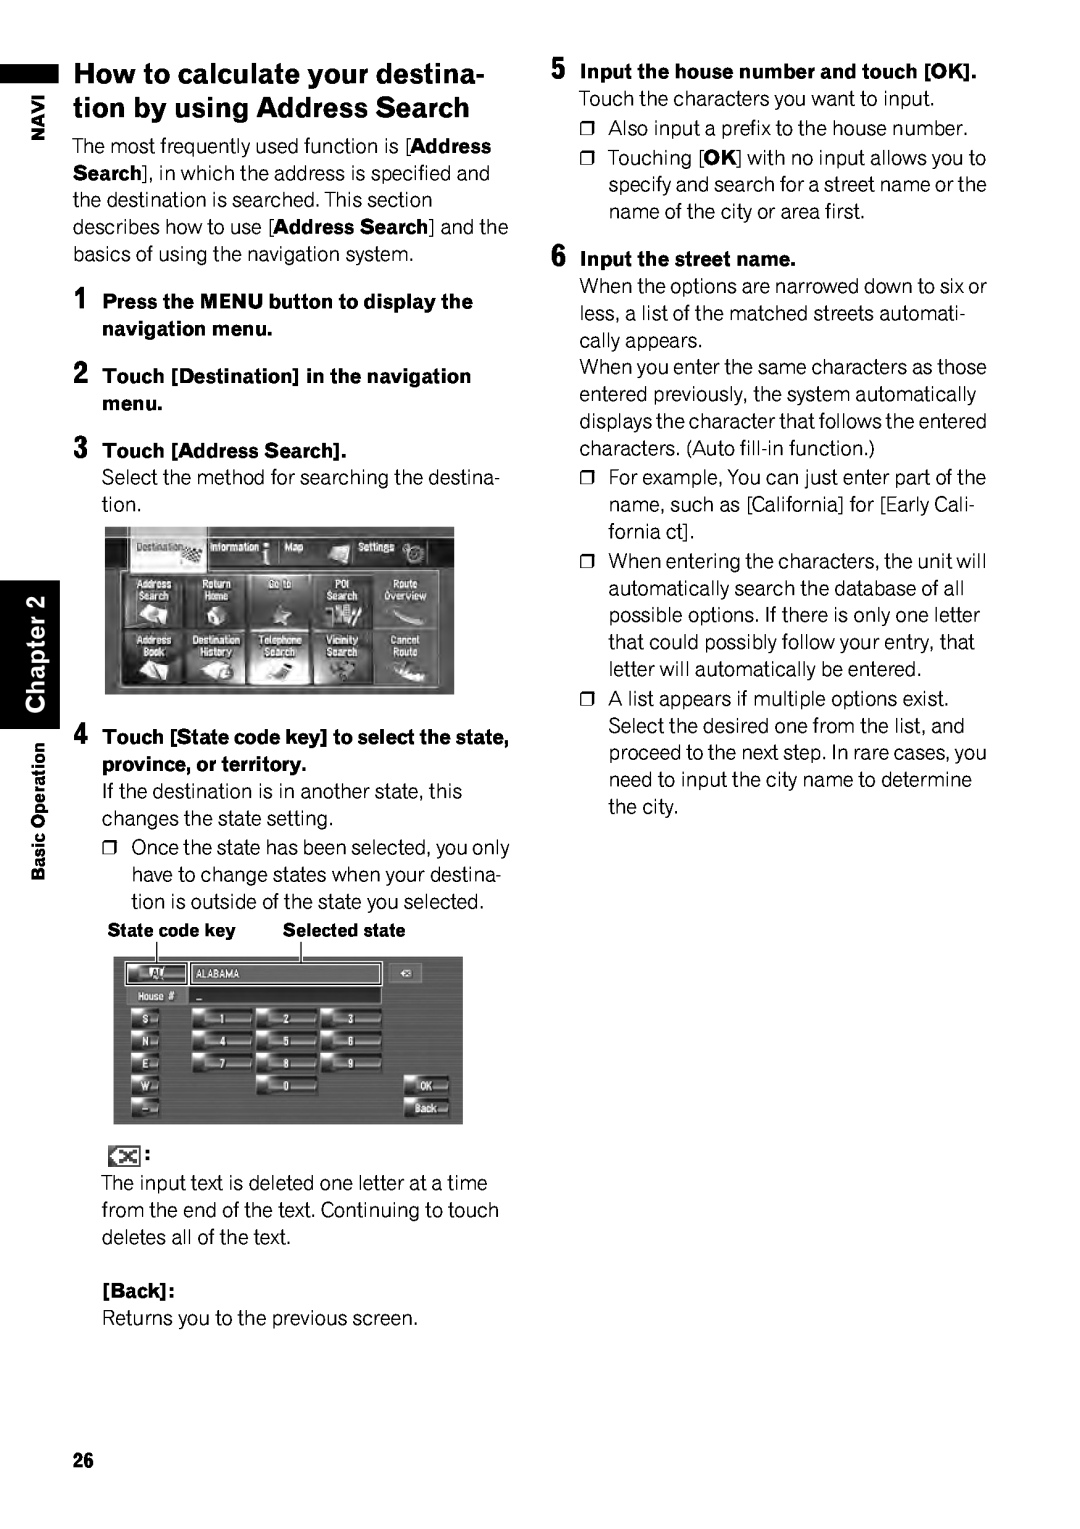 Pioneer AVIC-Z1 operation manual How to calculate your destina, tion by using Address Search, Chapter 